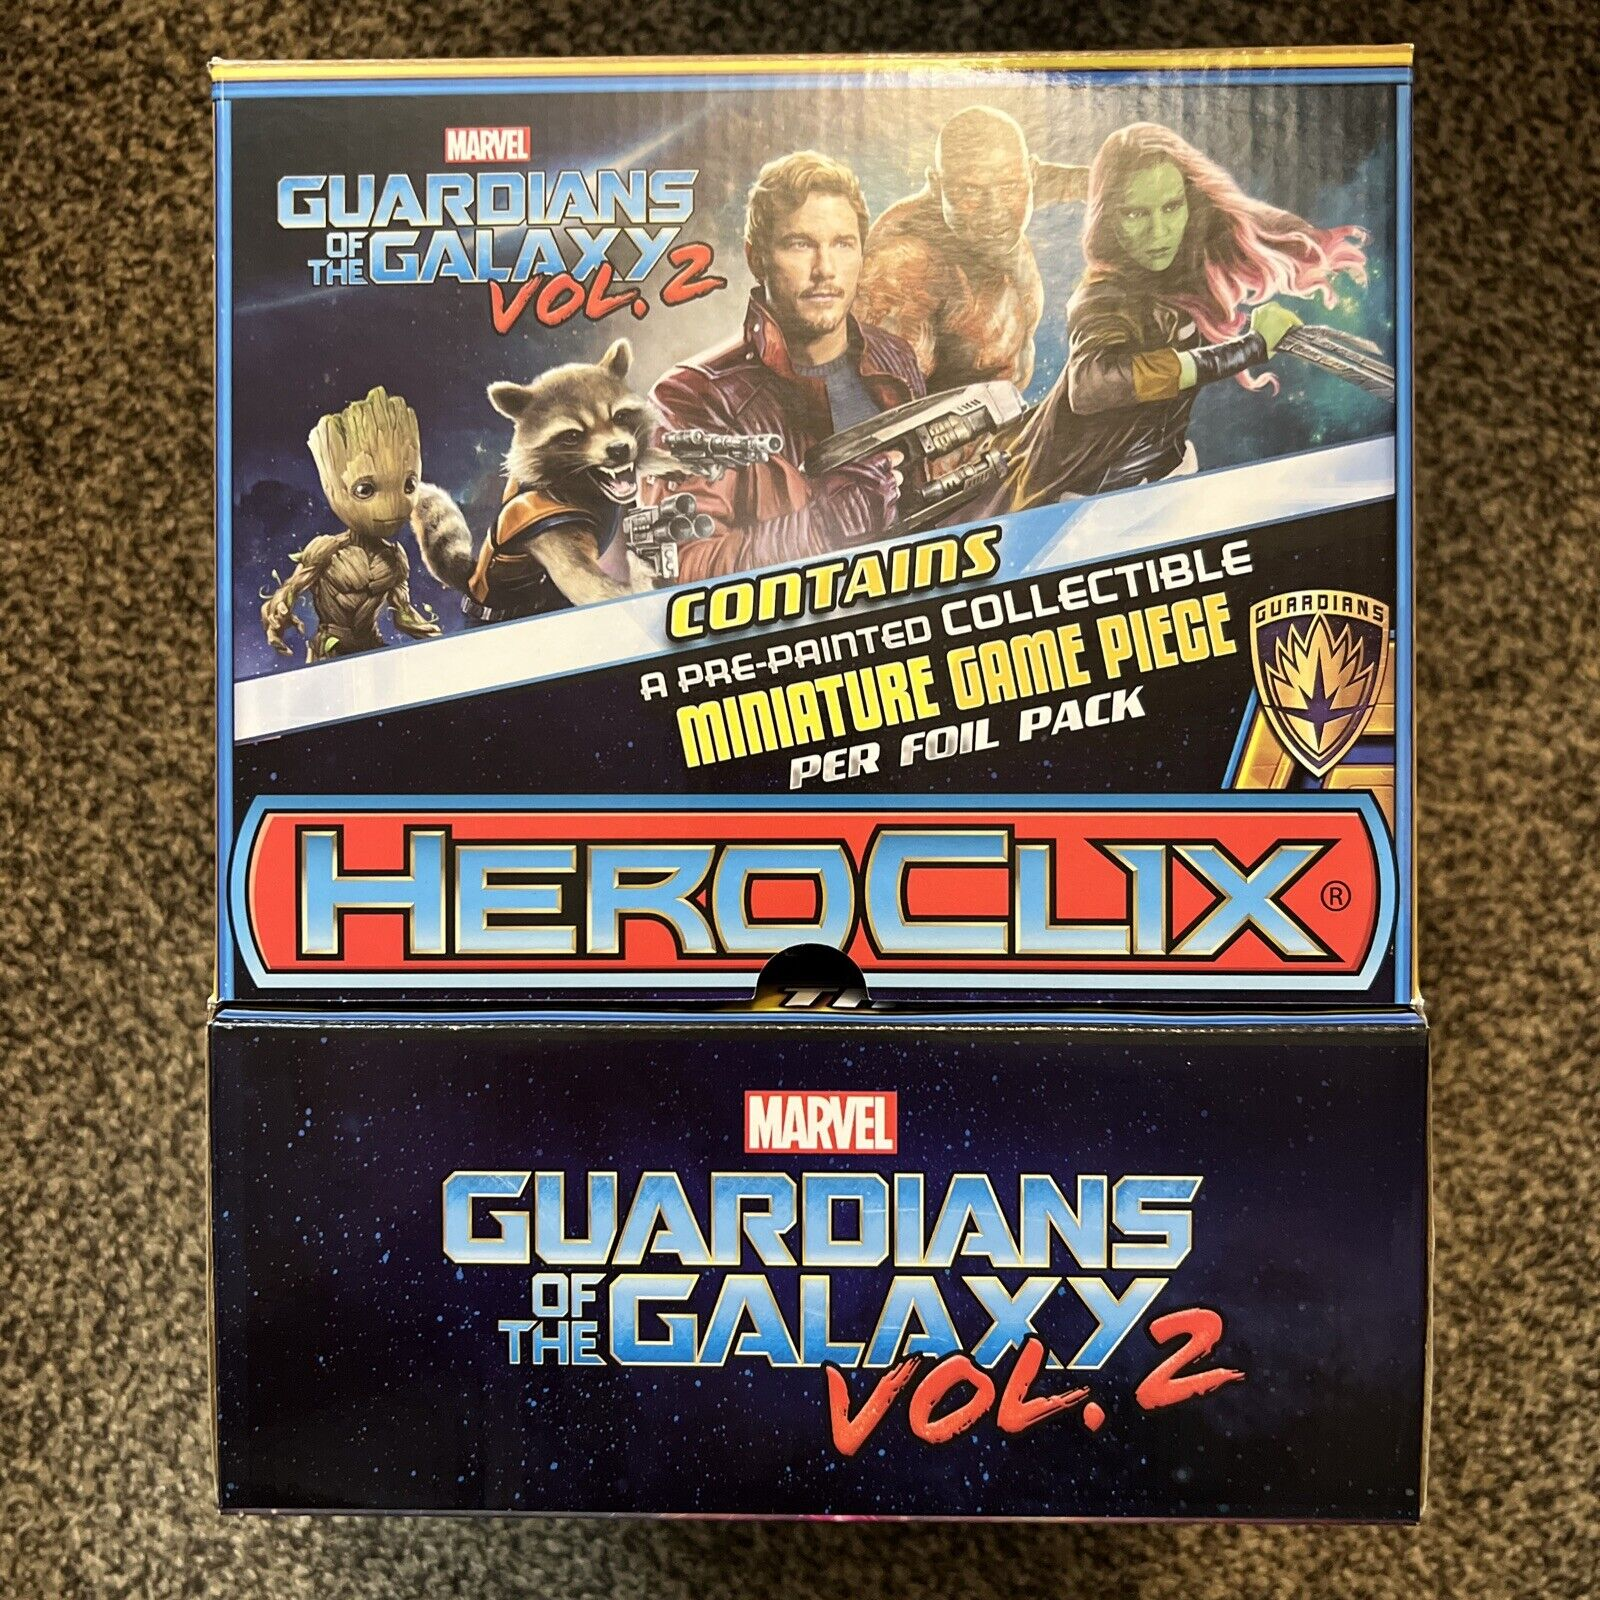 Marvel HeroClix: Guardians of the Galaxy Vol 2 (Ver A) 24ct Gravity Feed Display